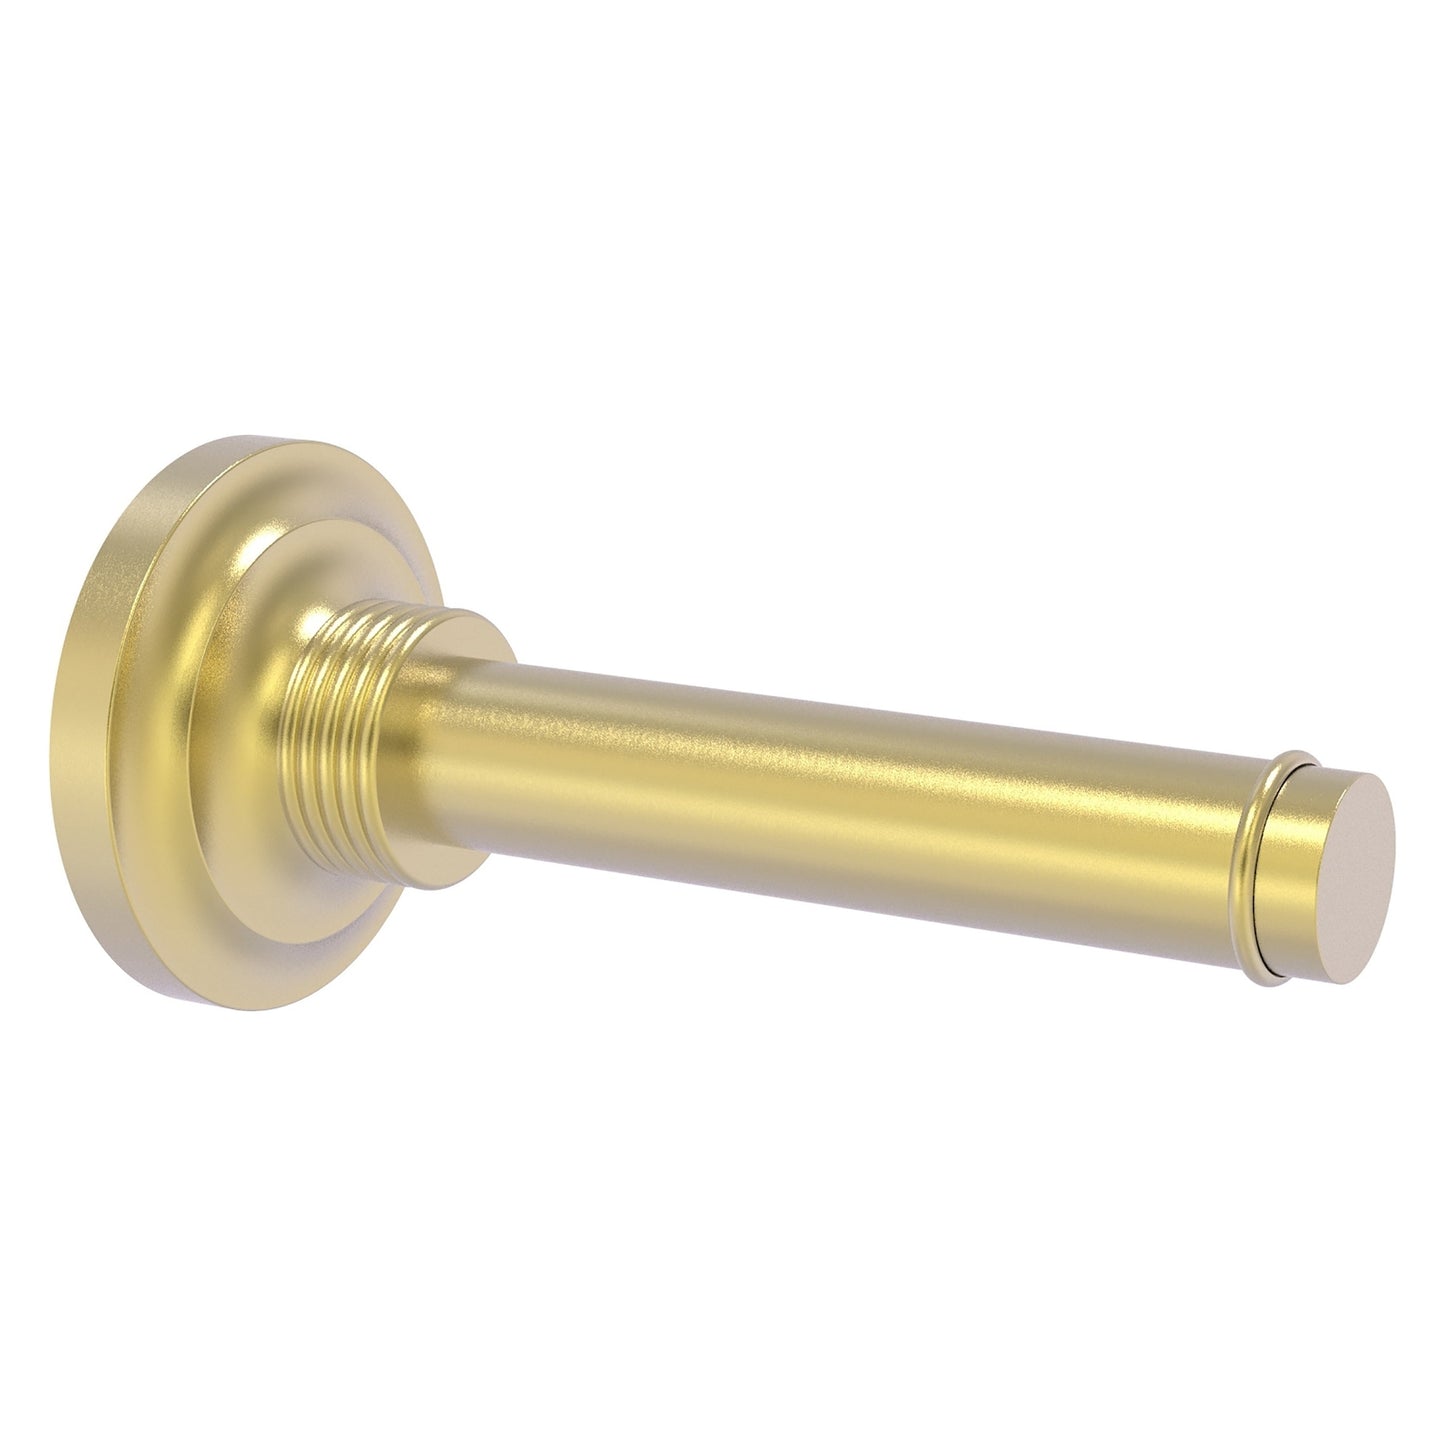 Allied Brass Que New 6.4" x 3" Satin Brass Solid Brass Horizontal Reserve Roll Toilet Paper Holder